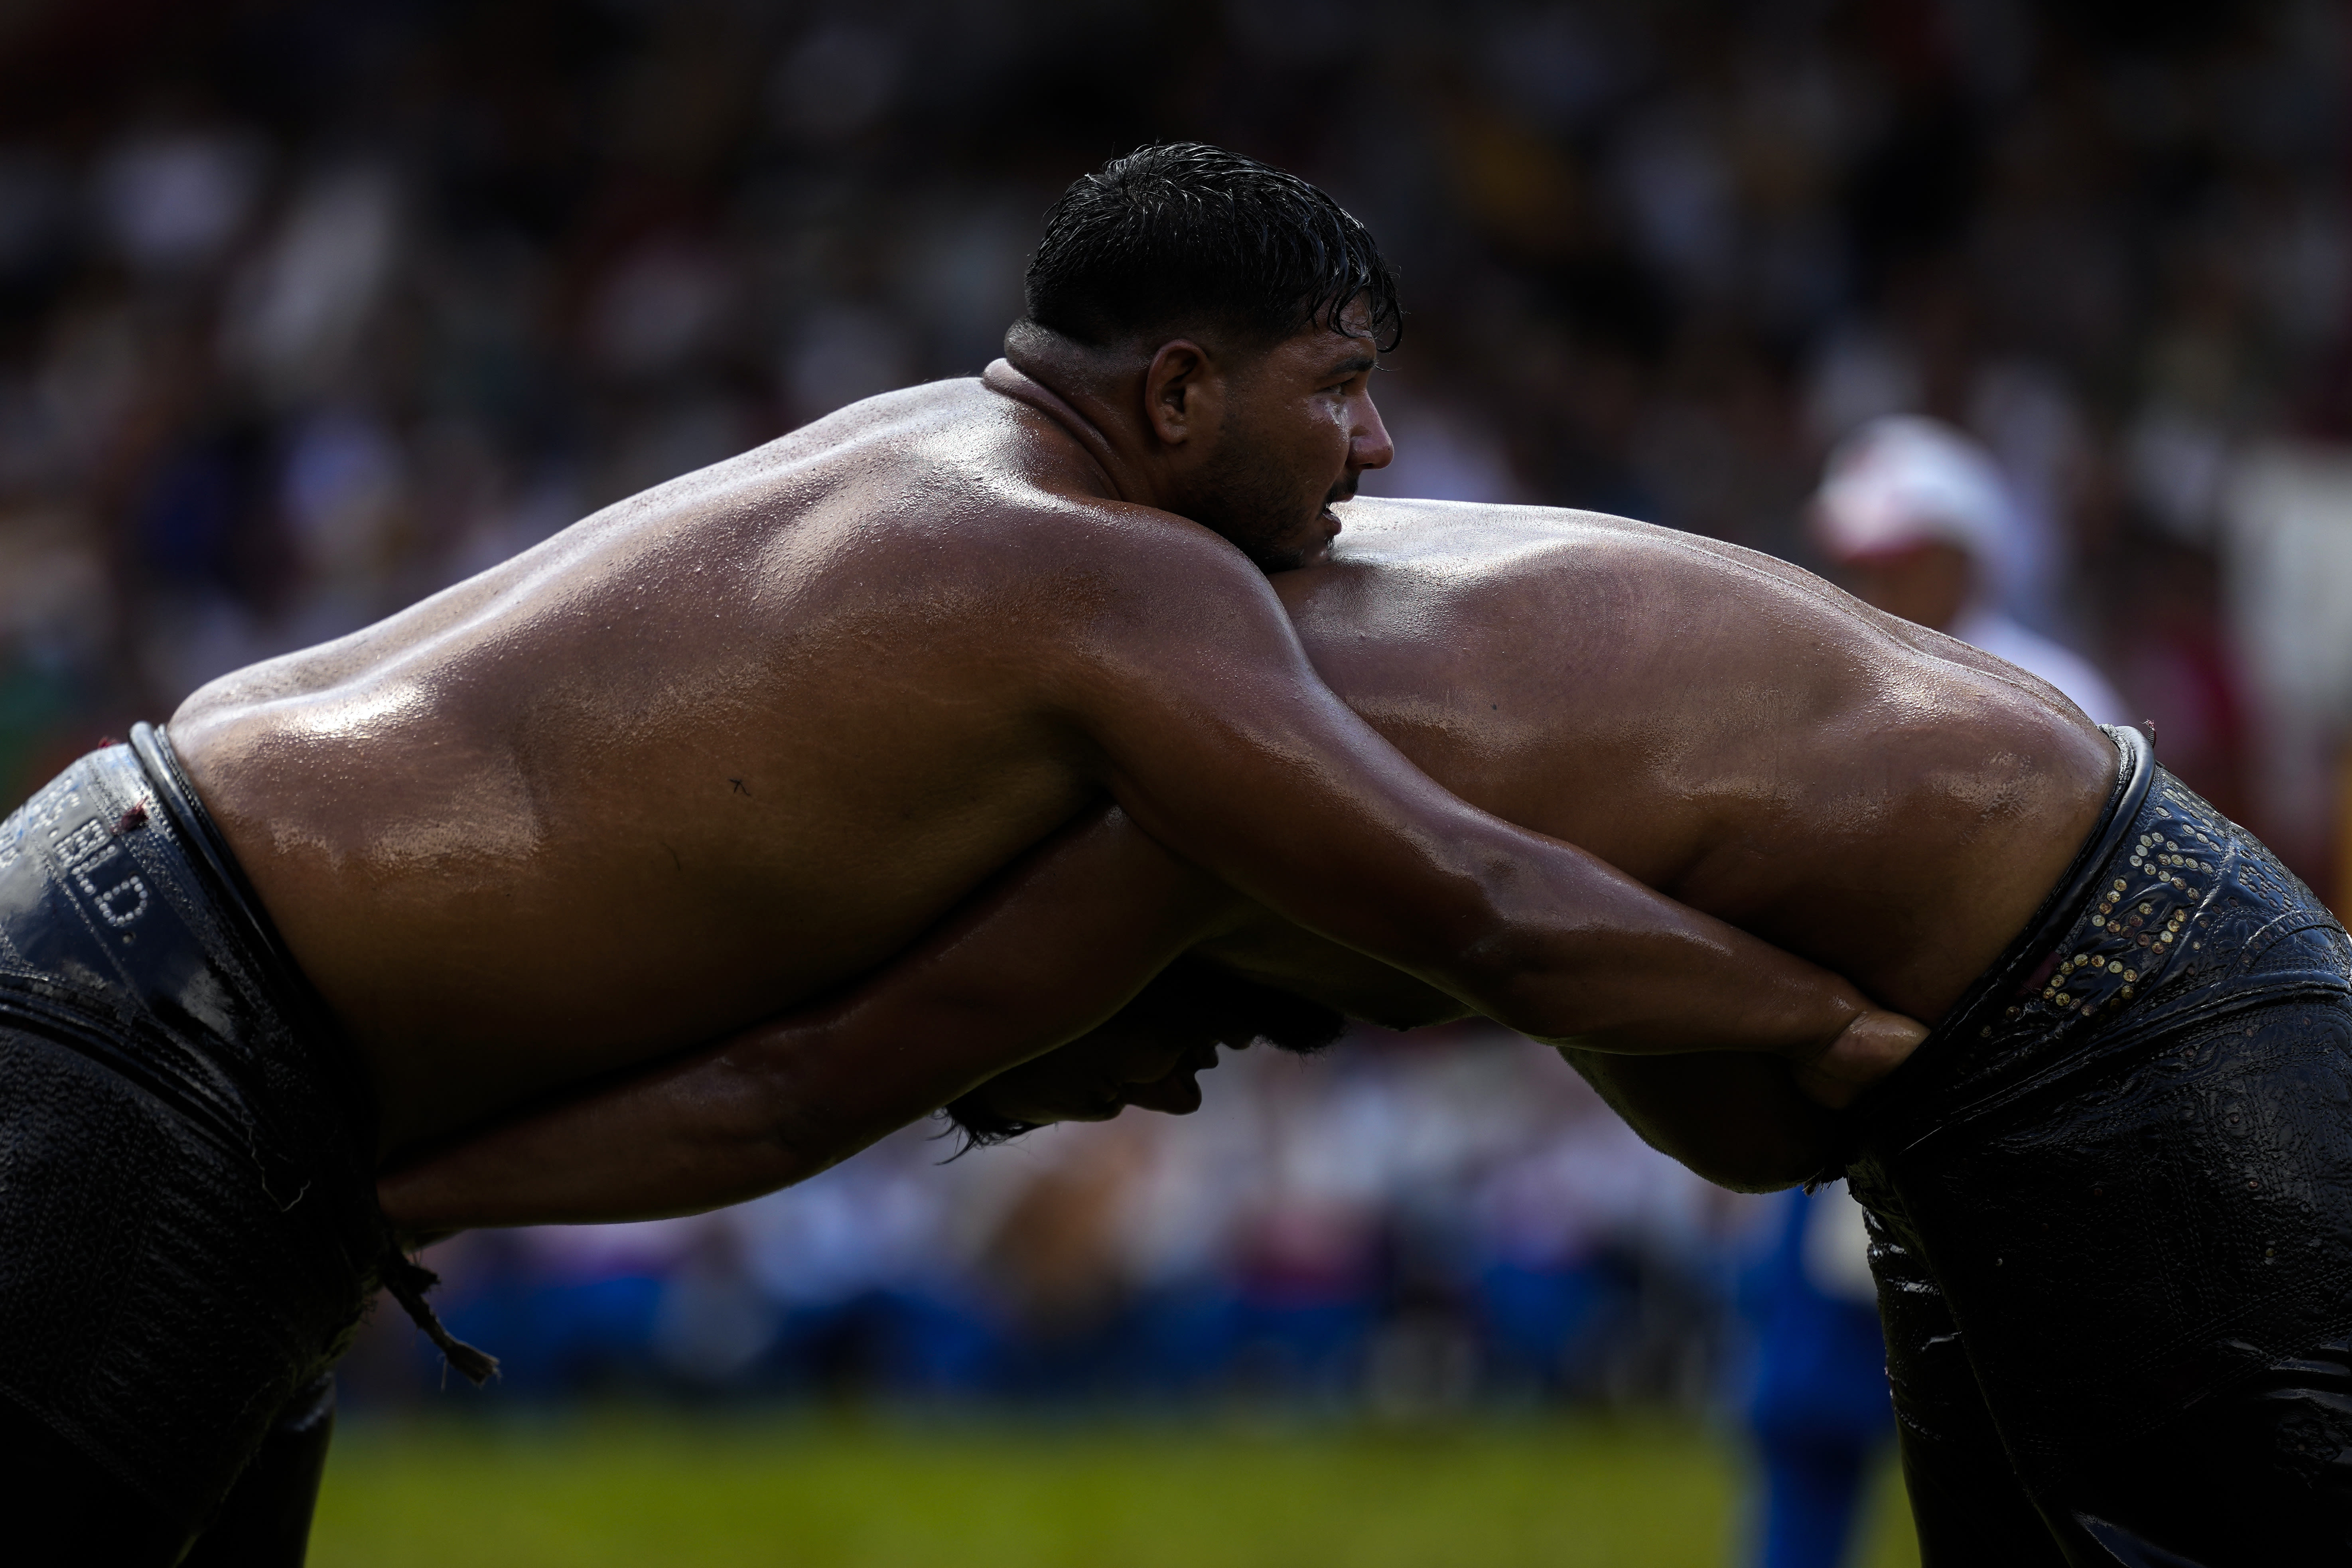 AP PHOTOS: Oil wrestlers battle for the title in a more than 600-year-old competition in Turkey